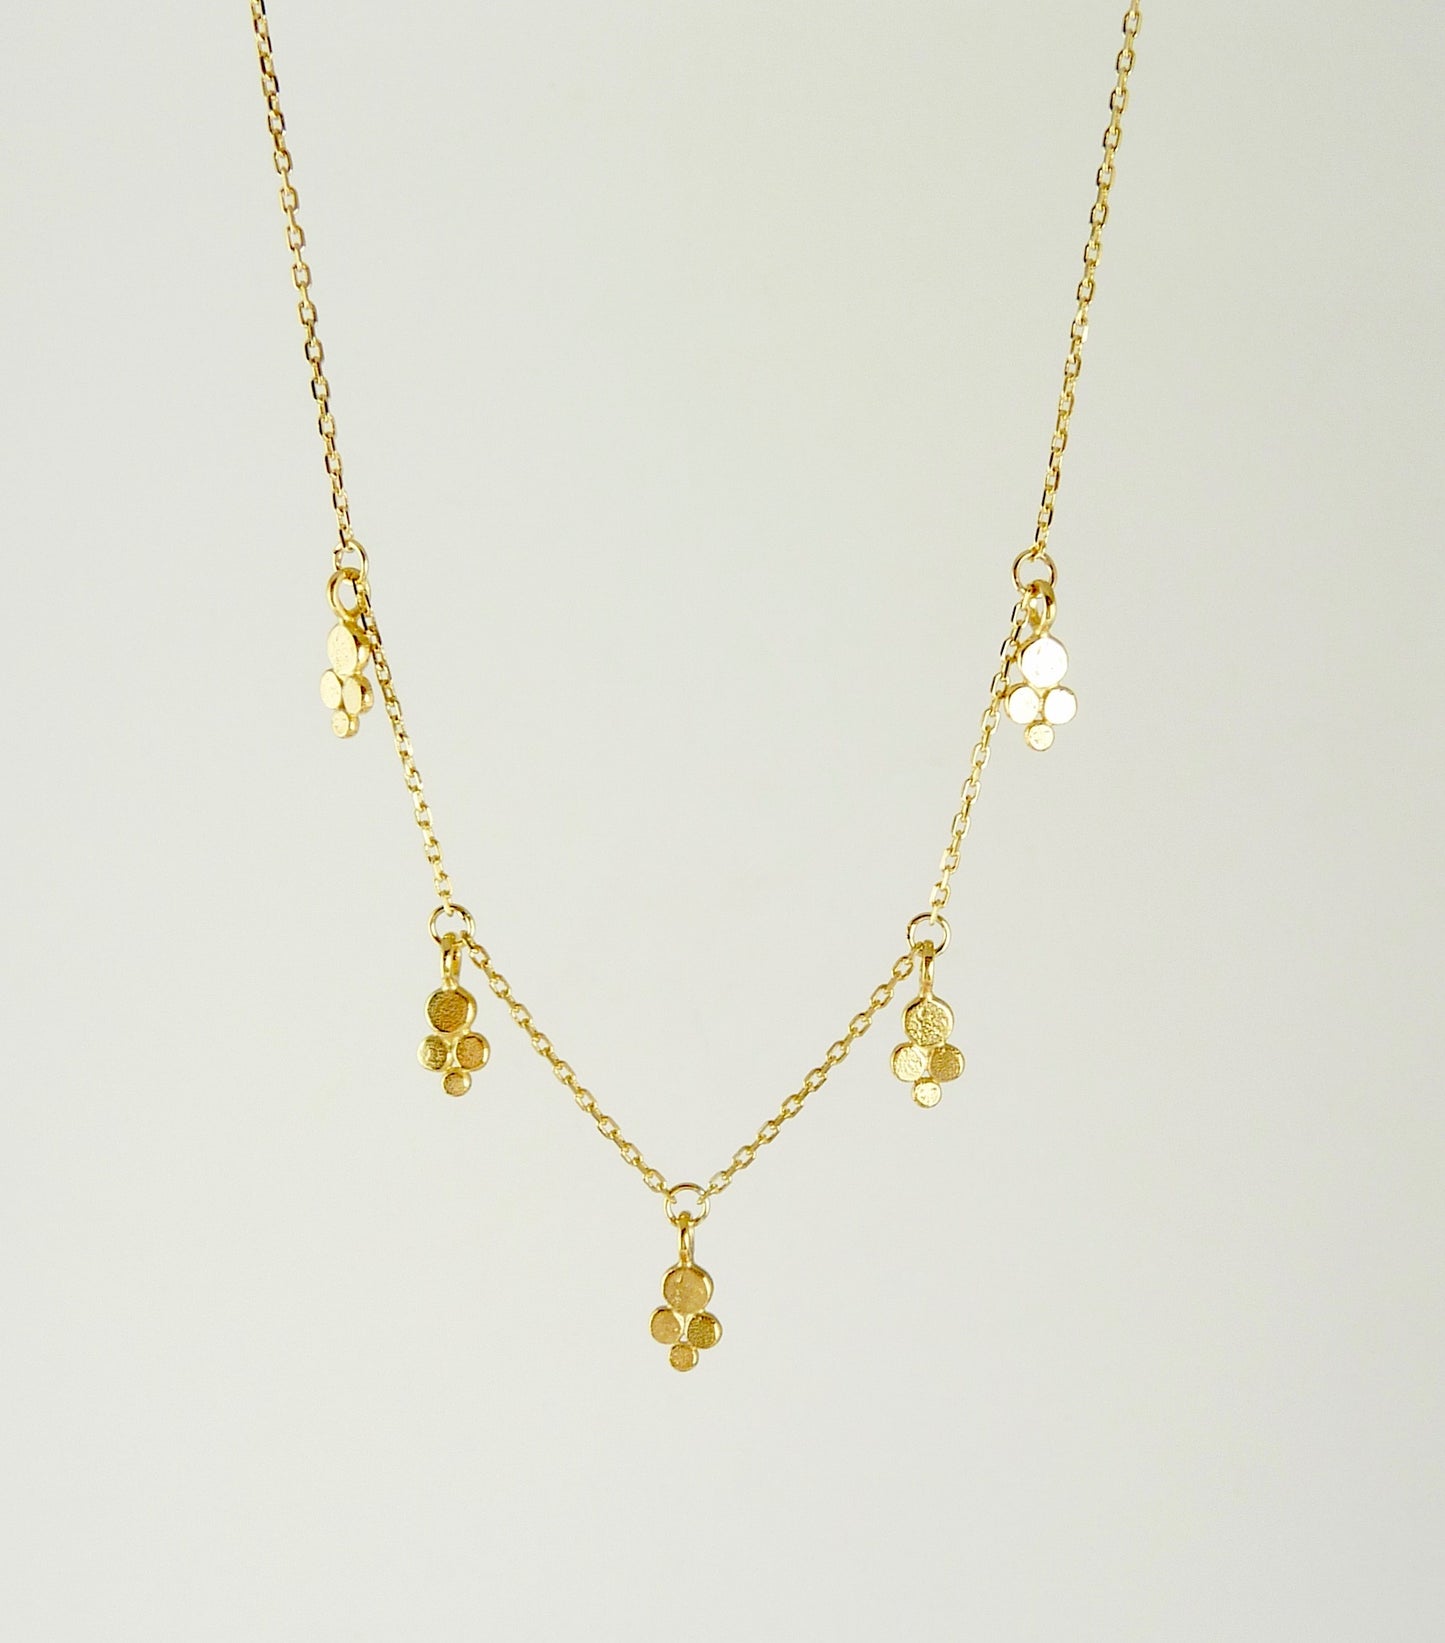 Darcy Dotted Delicate Granulation Necklace